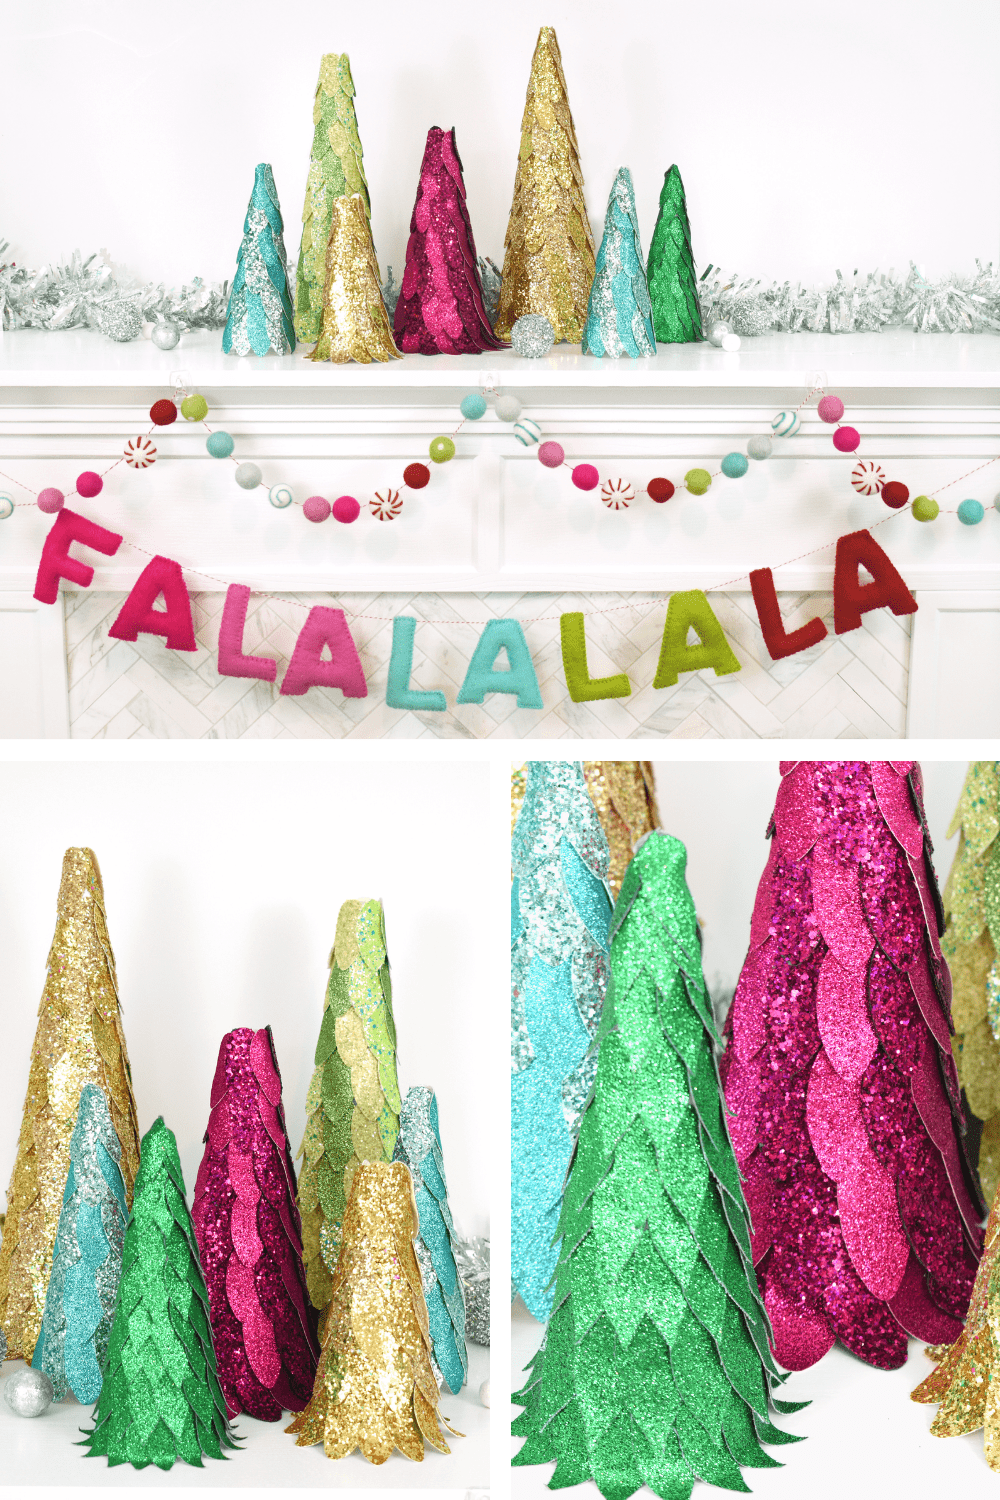 A collage of three images shows different ways of displaying DIY faux leather Christmas trees. The top images shows the Christmas tree crafts lined up on a white fireplace mantel that’s decorated with colorful garland and a “fa la la” banner. The bottom images are close-up photos of the DIY leather Christmas tree crafts, showing the detail of the glitter, color, and petals on the trees.